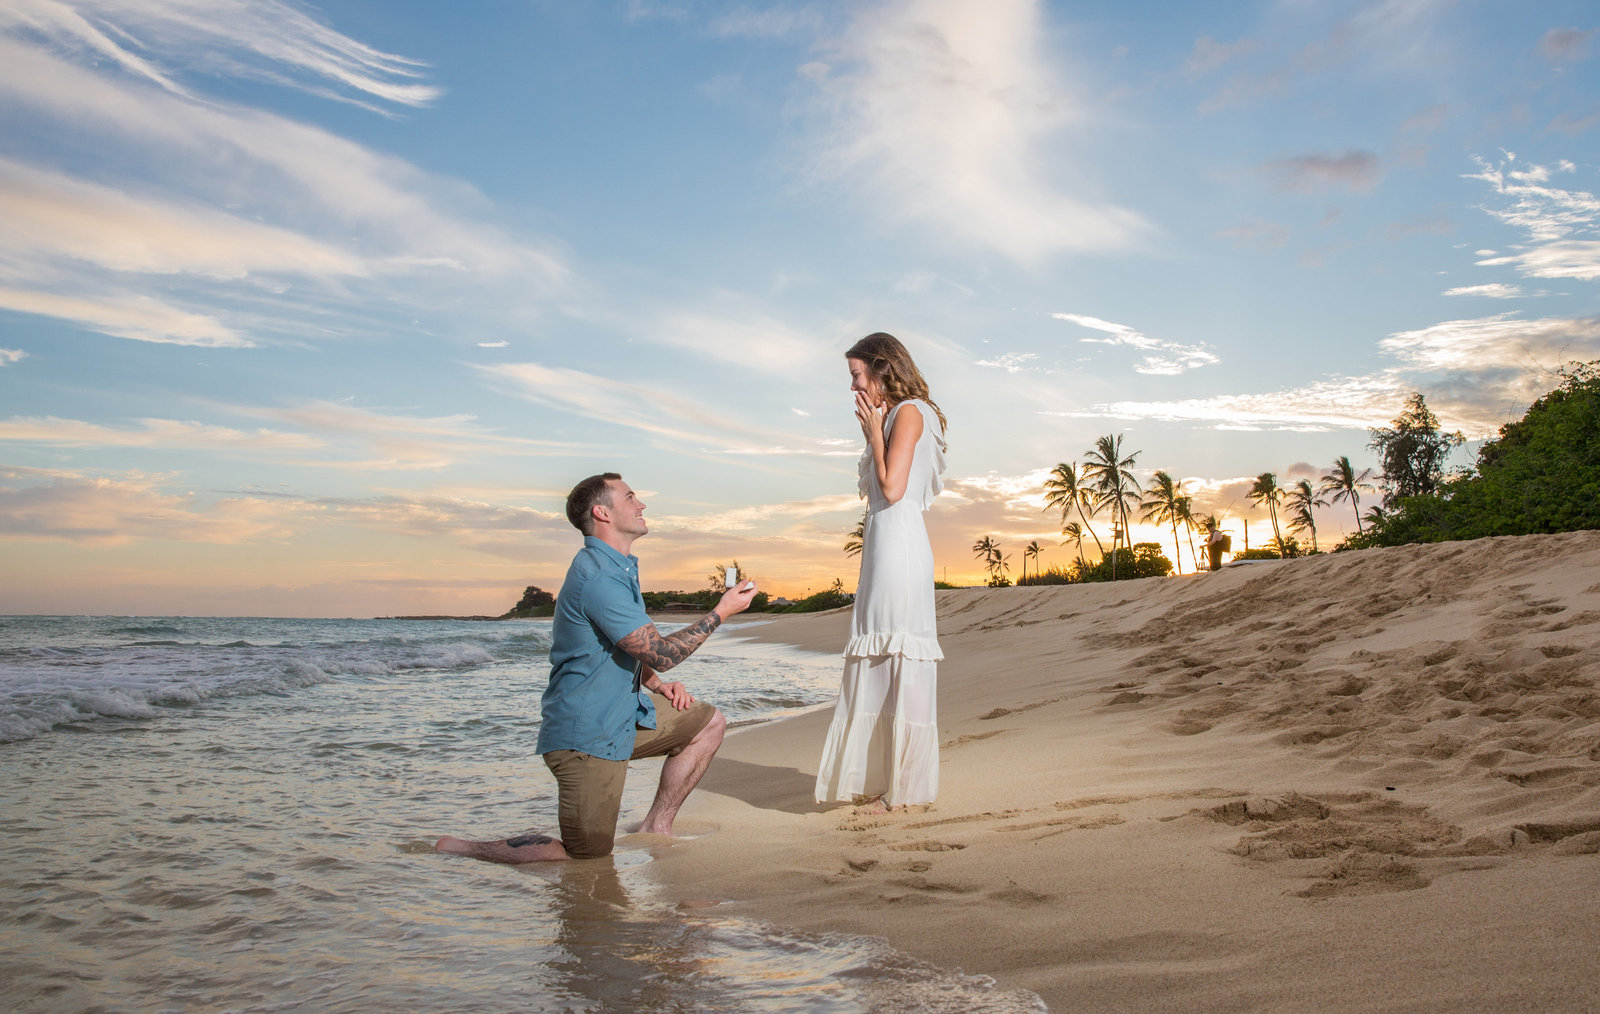 Proposal Photographer in Oahu